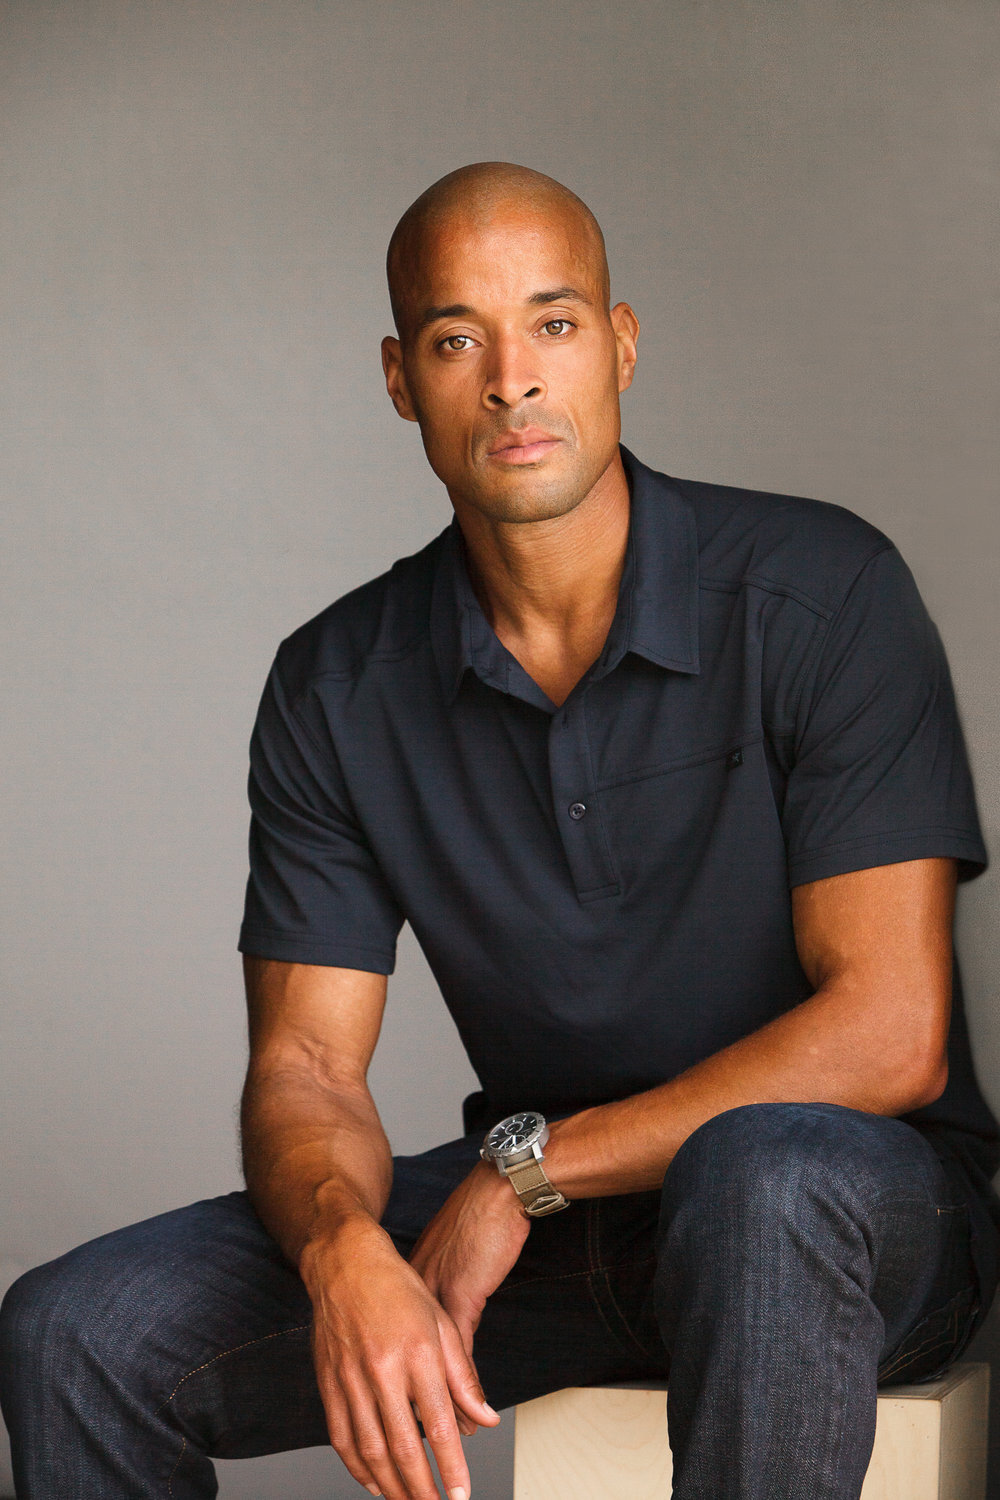 David Goggins (Source: The Fittest Experience)